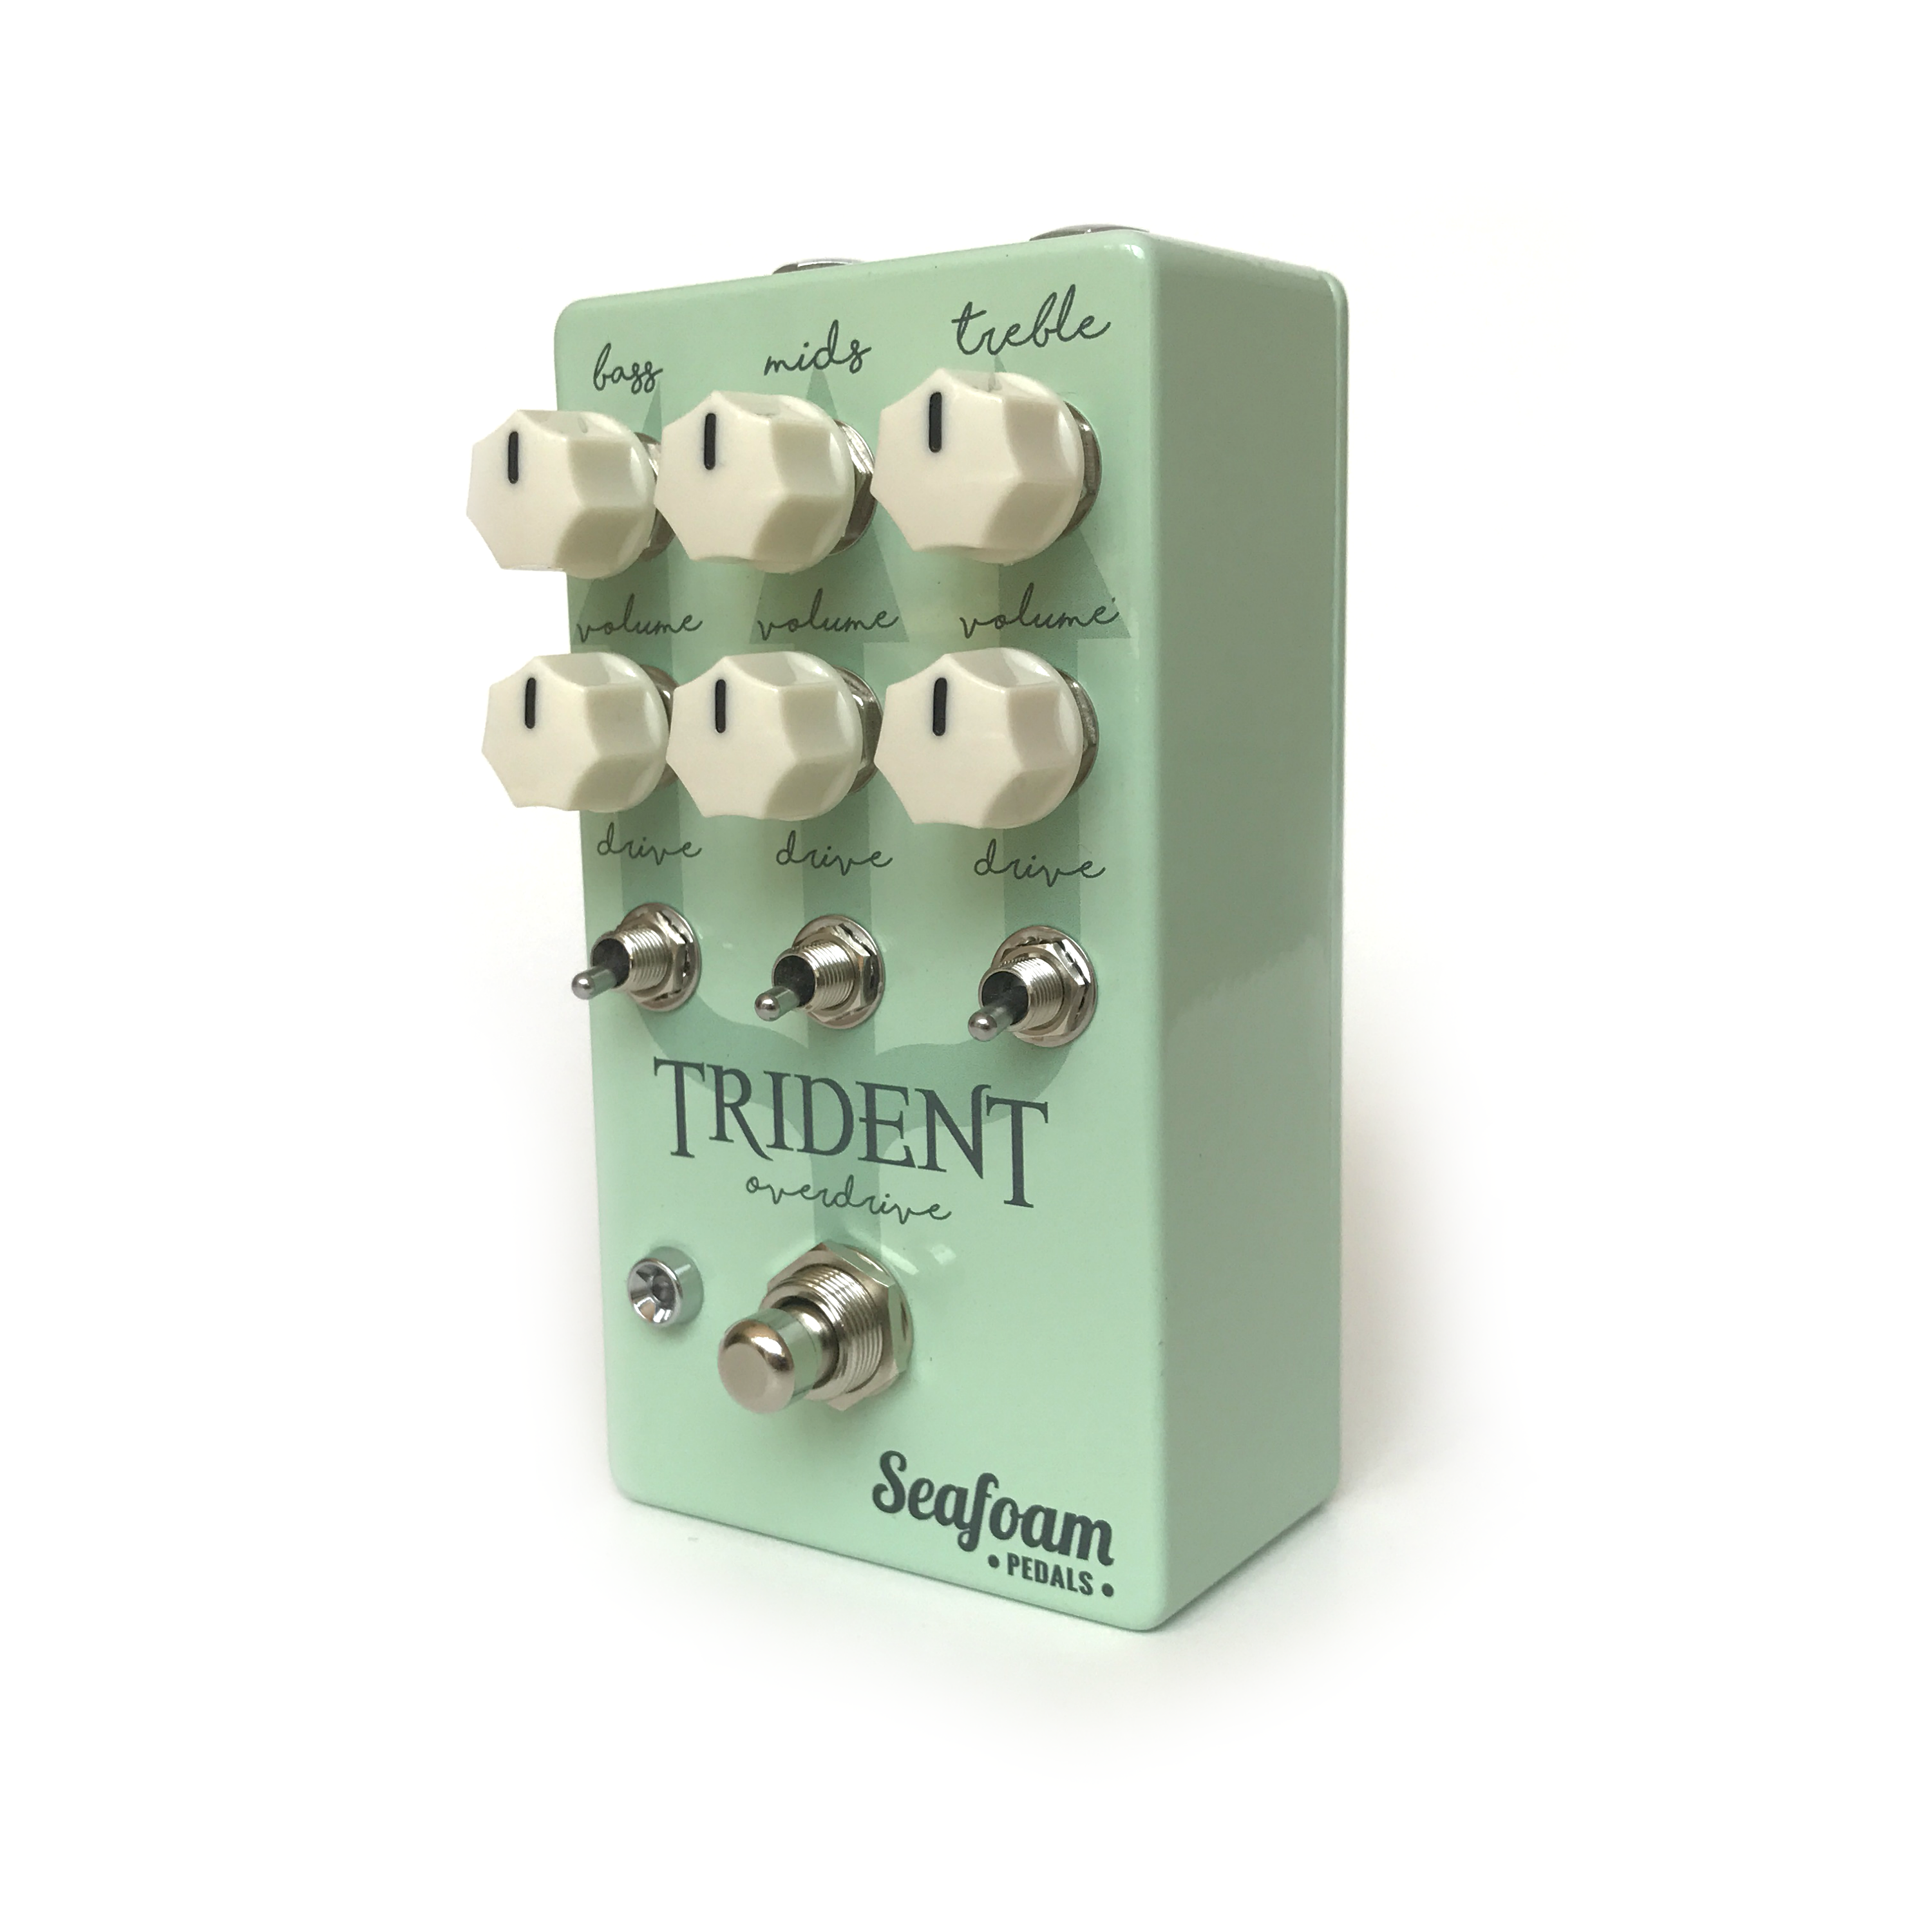 Trident Overdrive